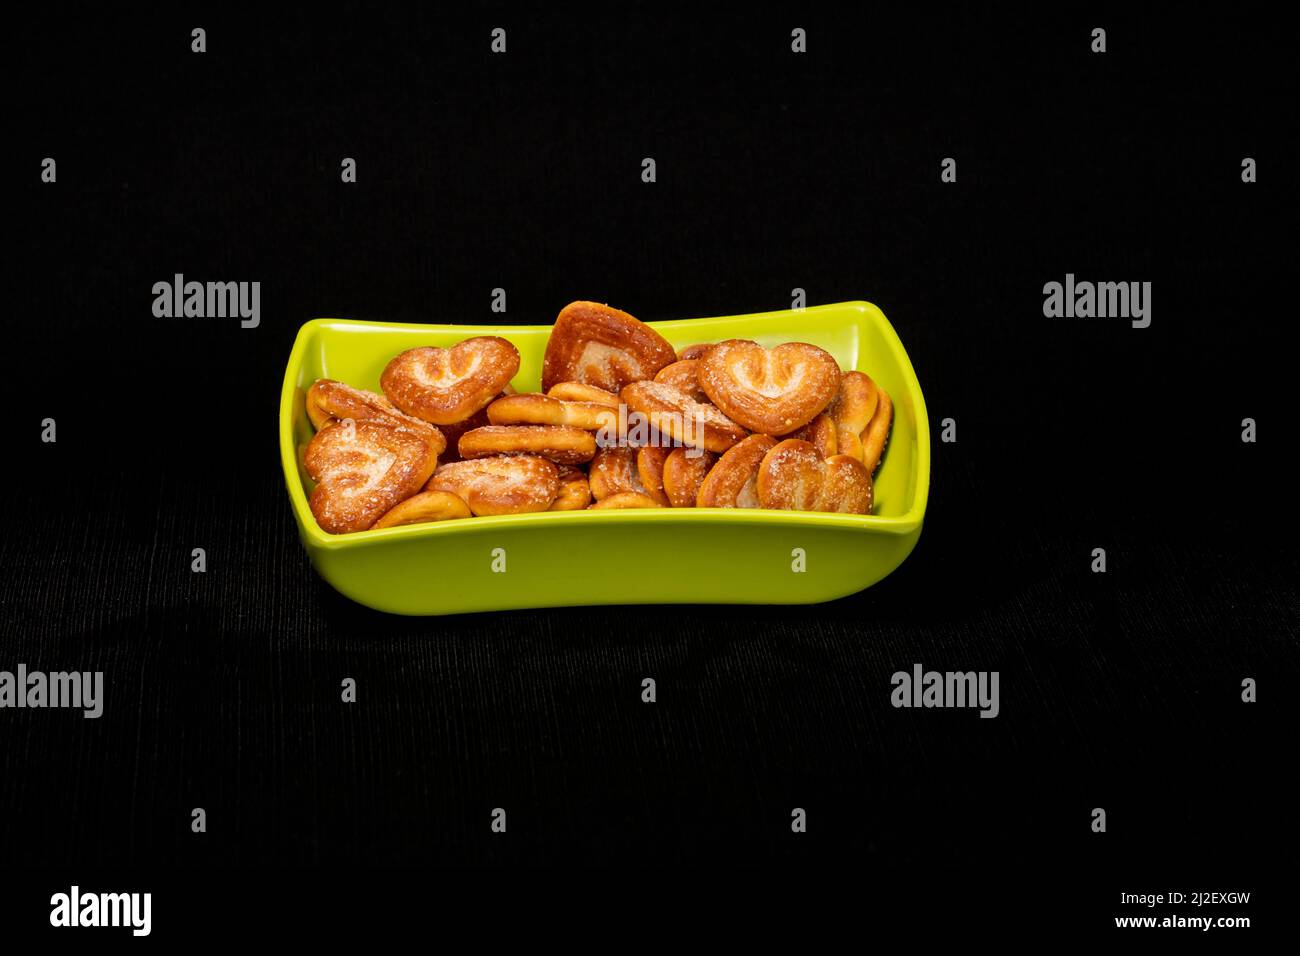 Hearts Shaped Biscuit In Green Square Bowl, Biscuits Heap, Isolated on Black Background Stock Photo